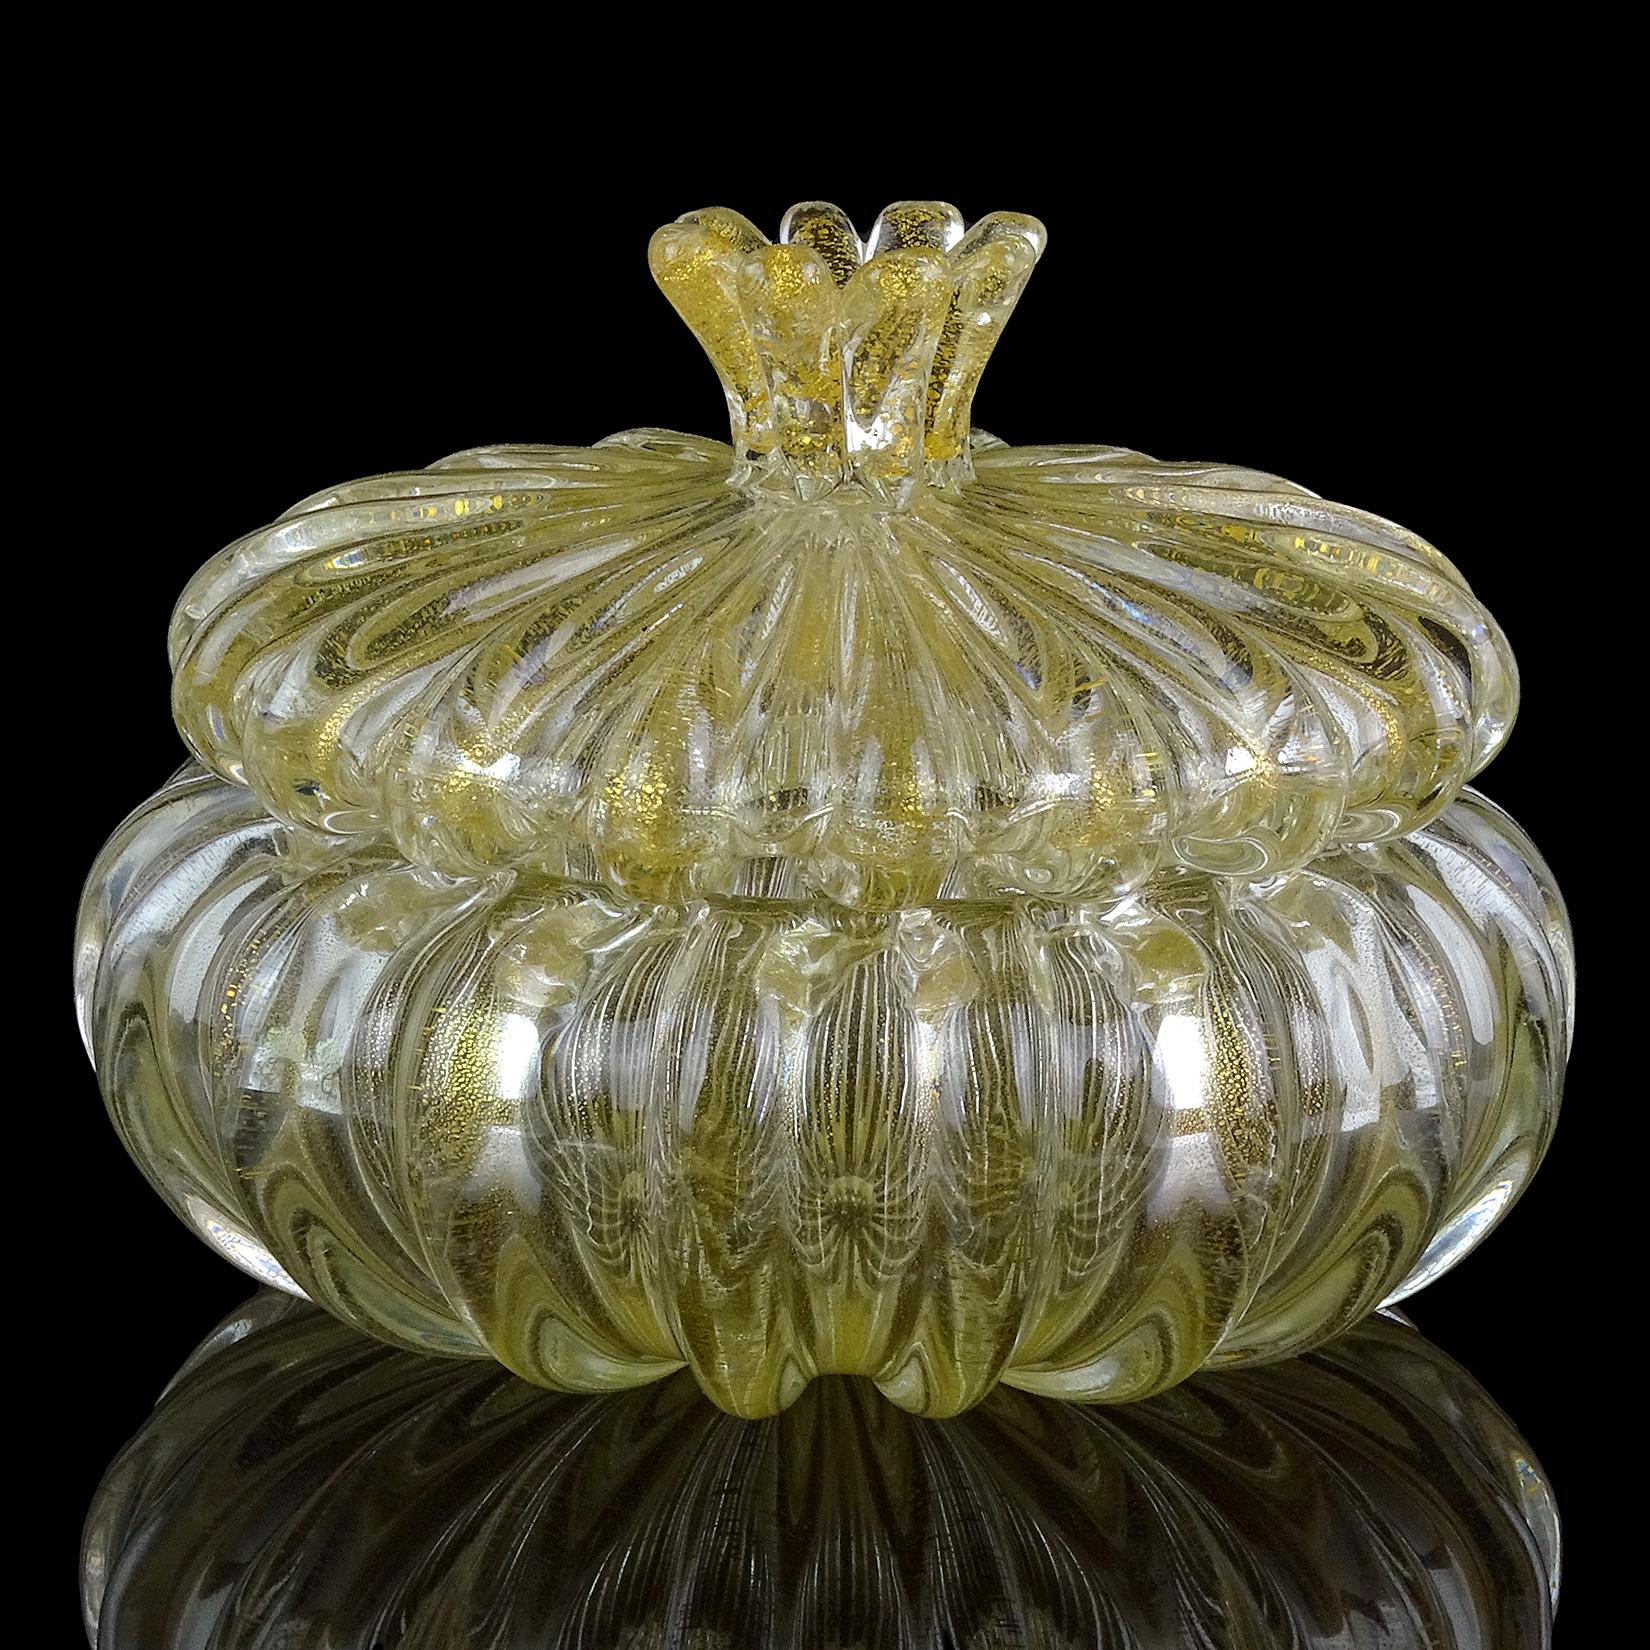 Elegant vintage Murano hand blown gold flecks Italian art glass vanity jewelry or powder box. Documented to designer Archimede Seguso. The entire piece is clear, and profusely covered in gold leaf. The lidded jar / box has a flower shape topper.